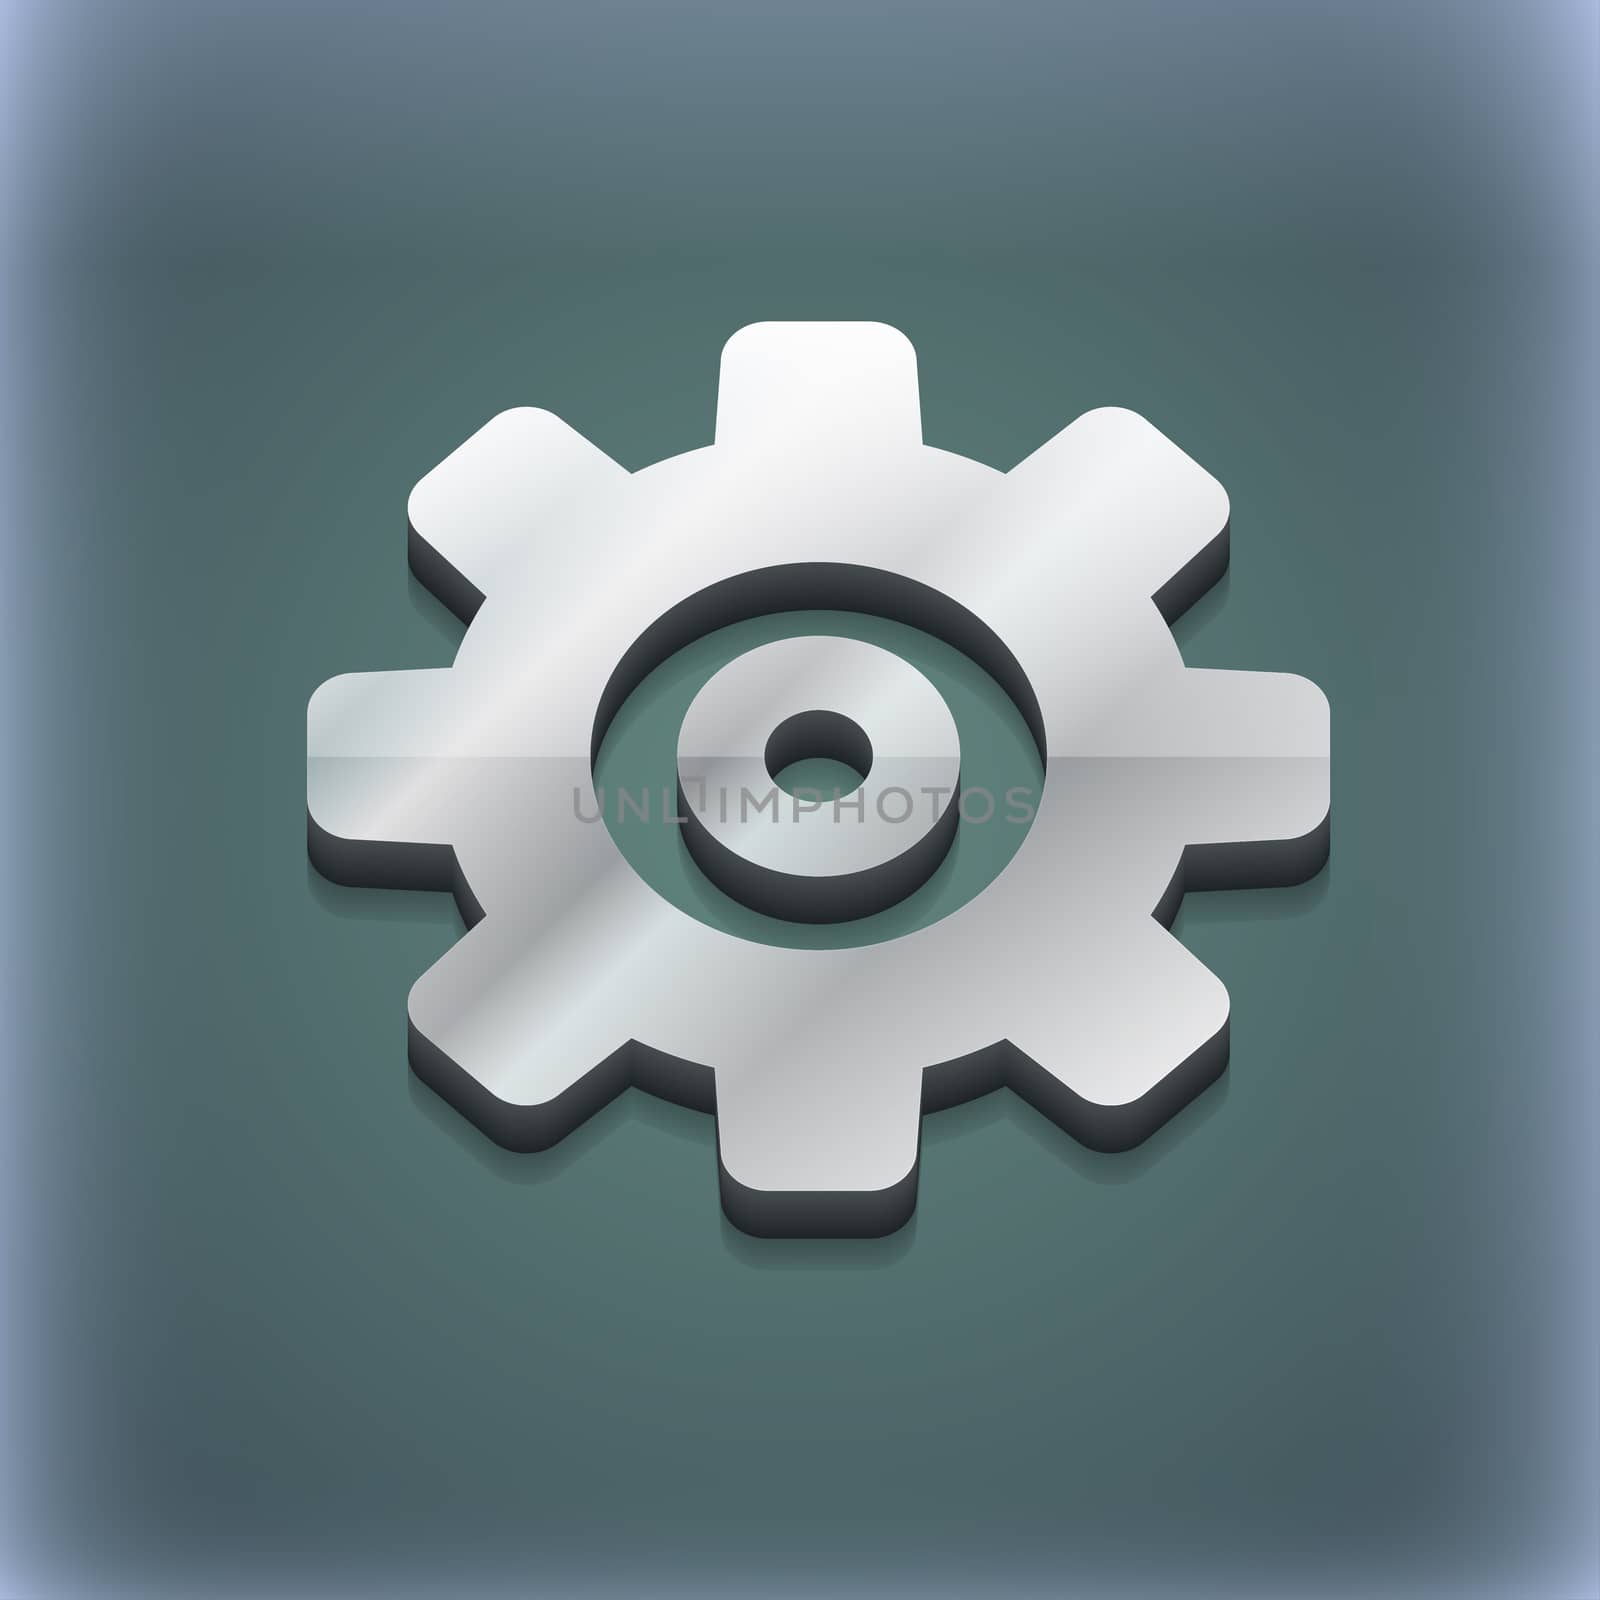 Cog settings, Cogwheel gear mechanism icon symbol. 3D style. Trendy, modern design with space for your text illustration. Raster version